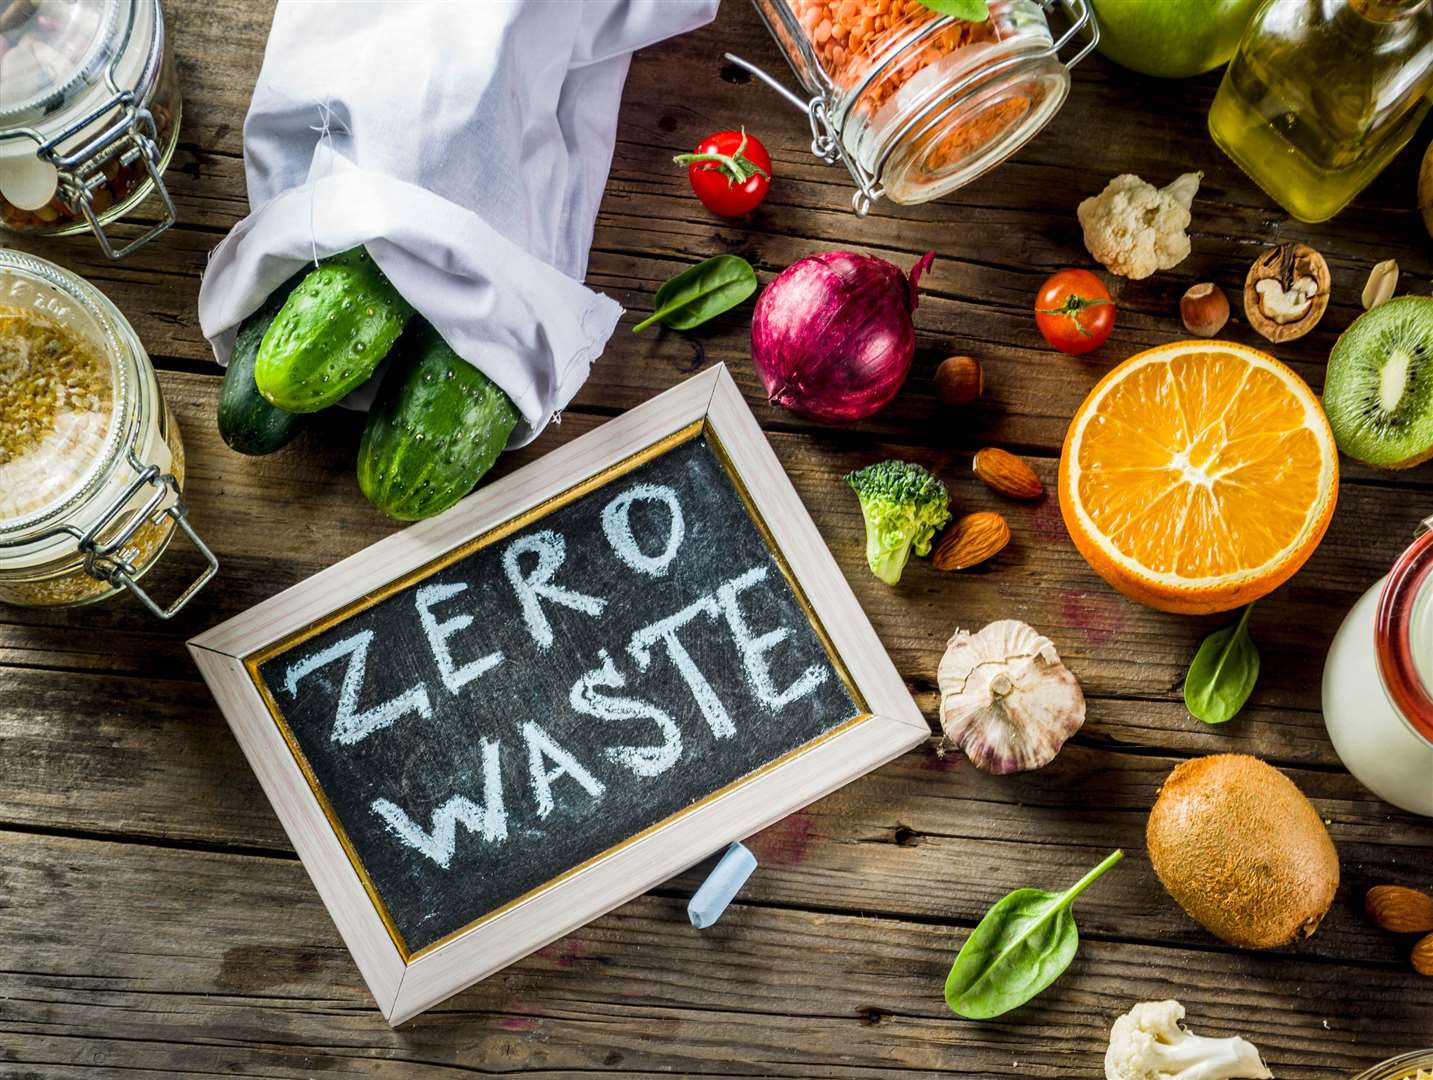 There are apps that will help you cut down on food waste. Photo: Stock image.